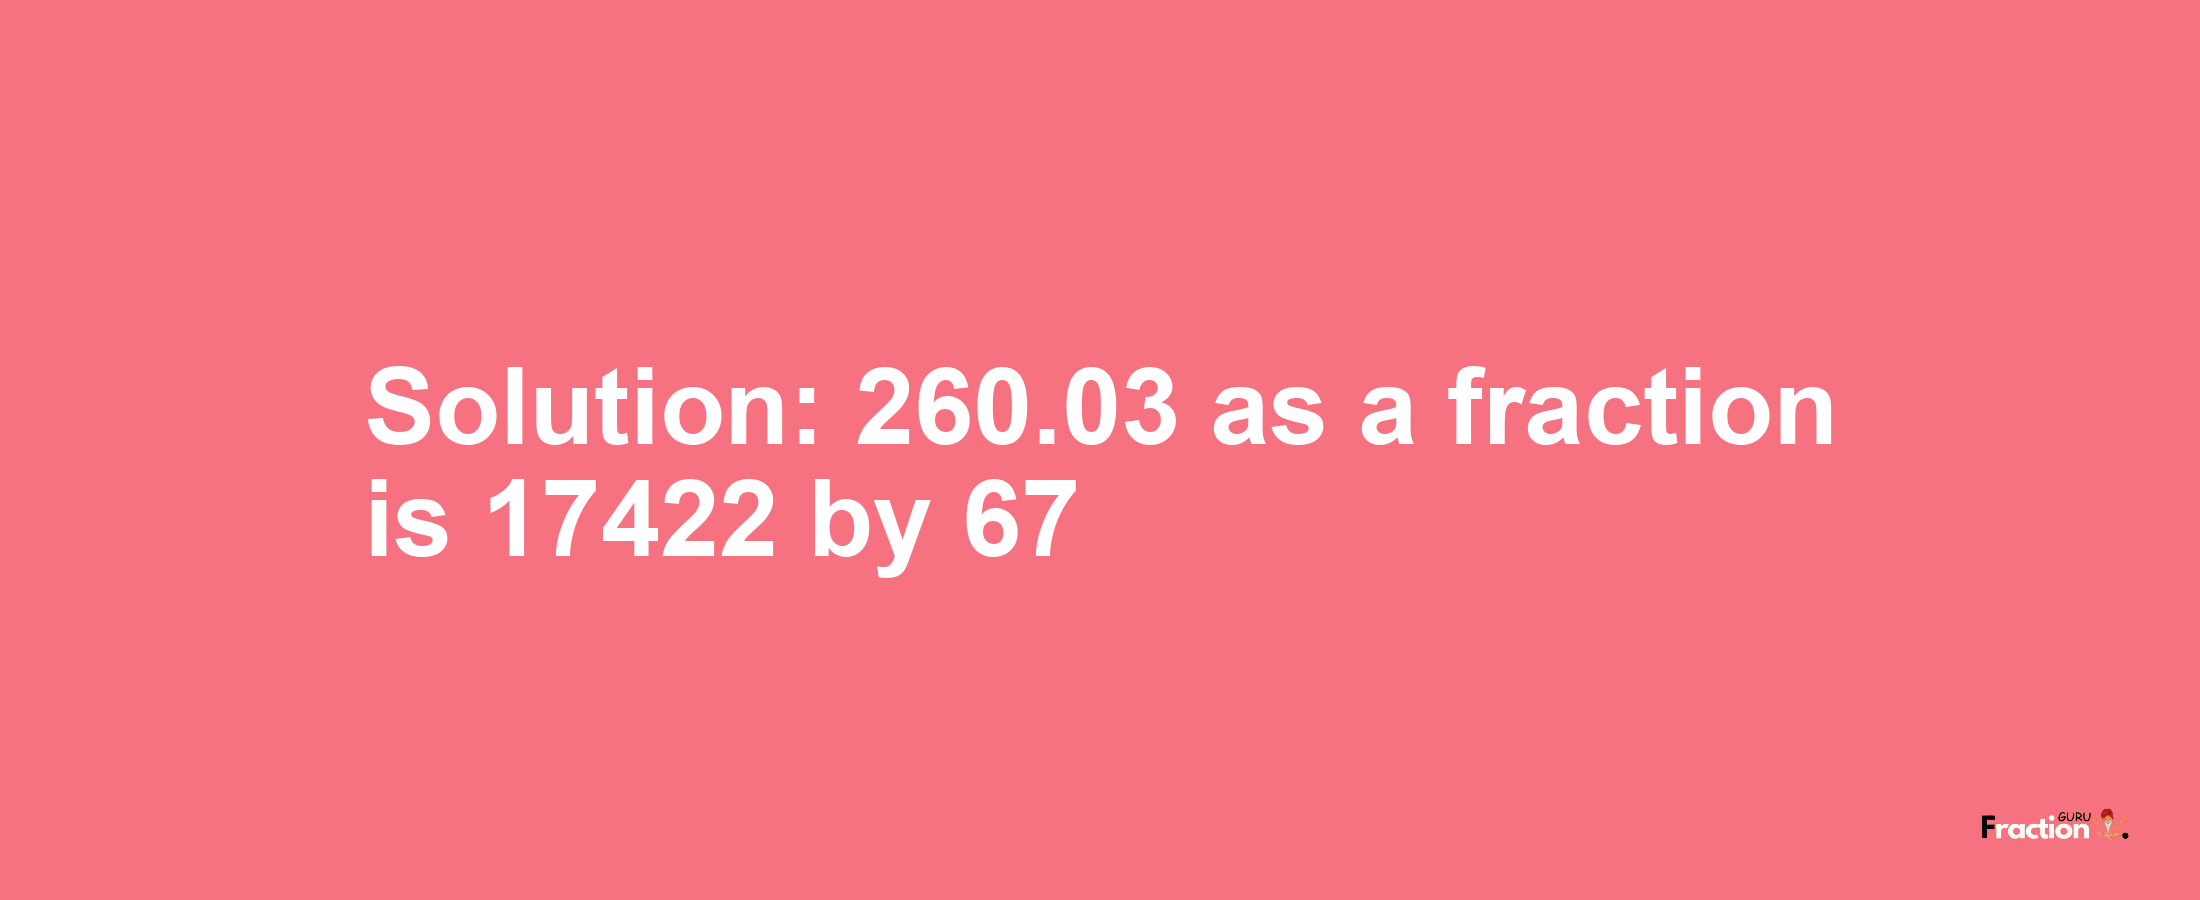 Solution:260.03 as a fraction is 17422/67